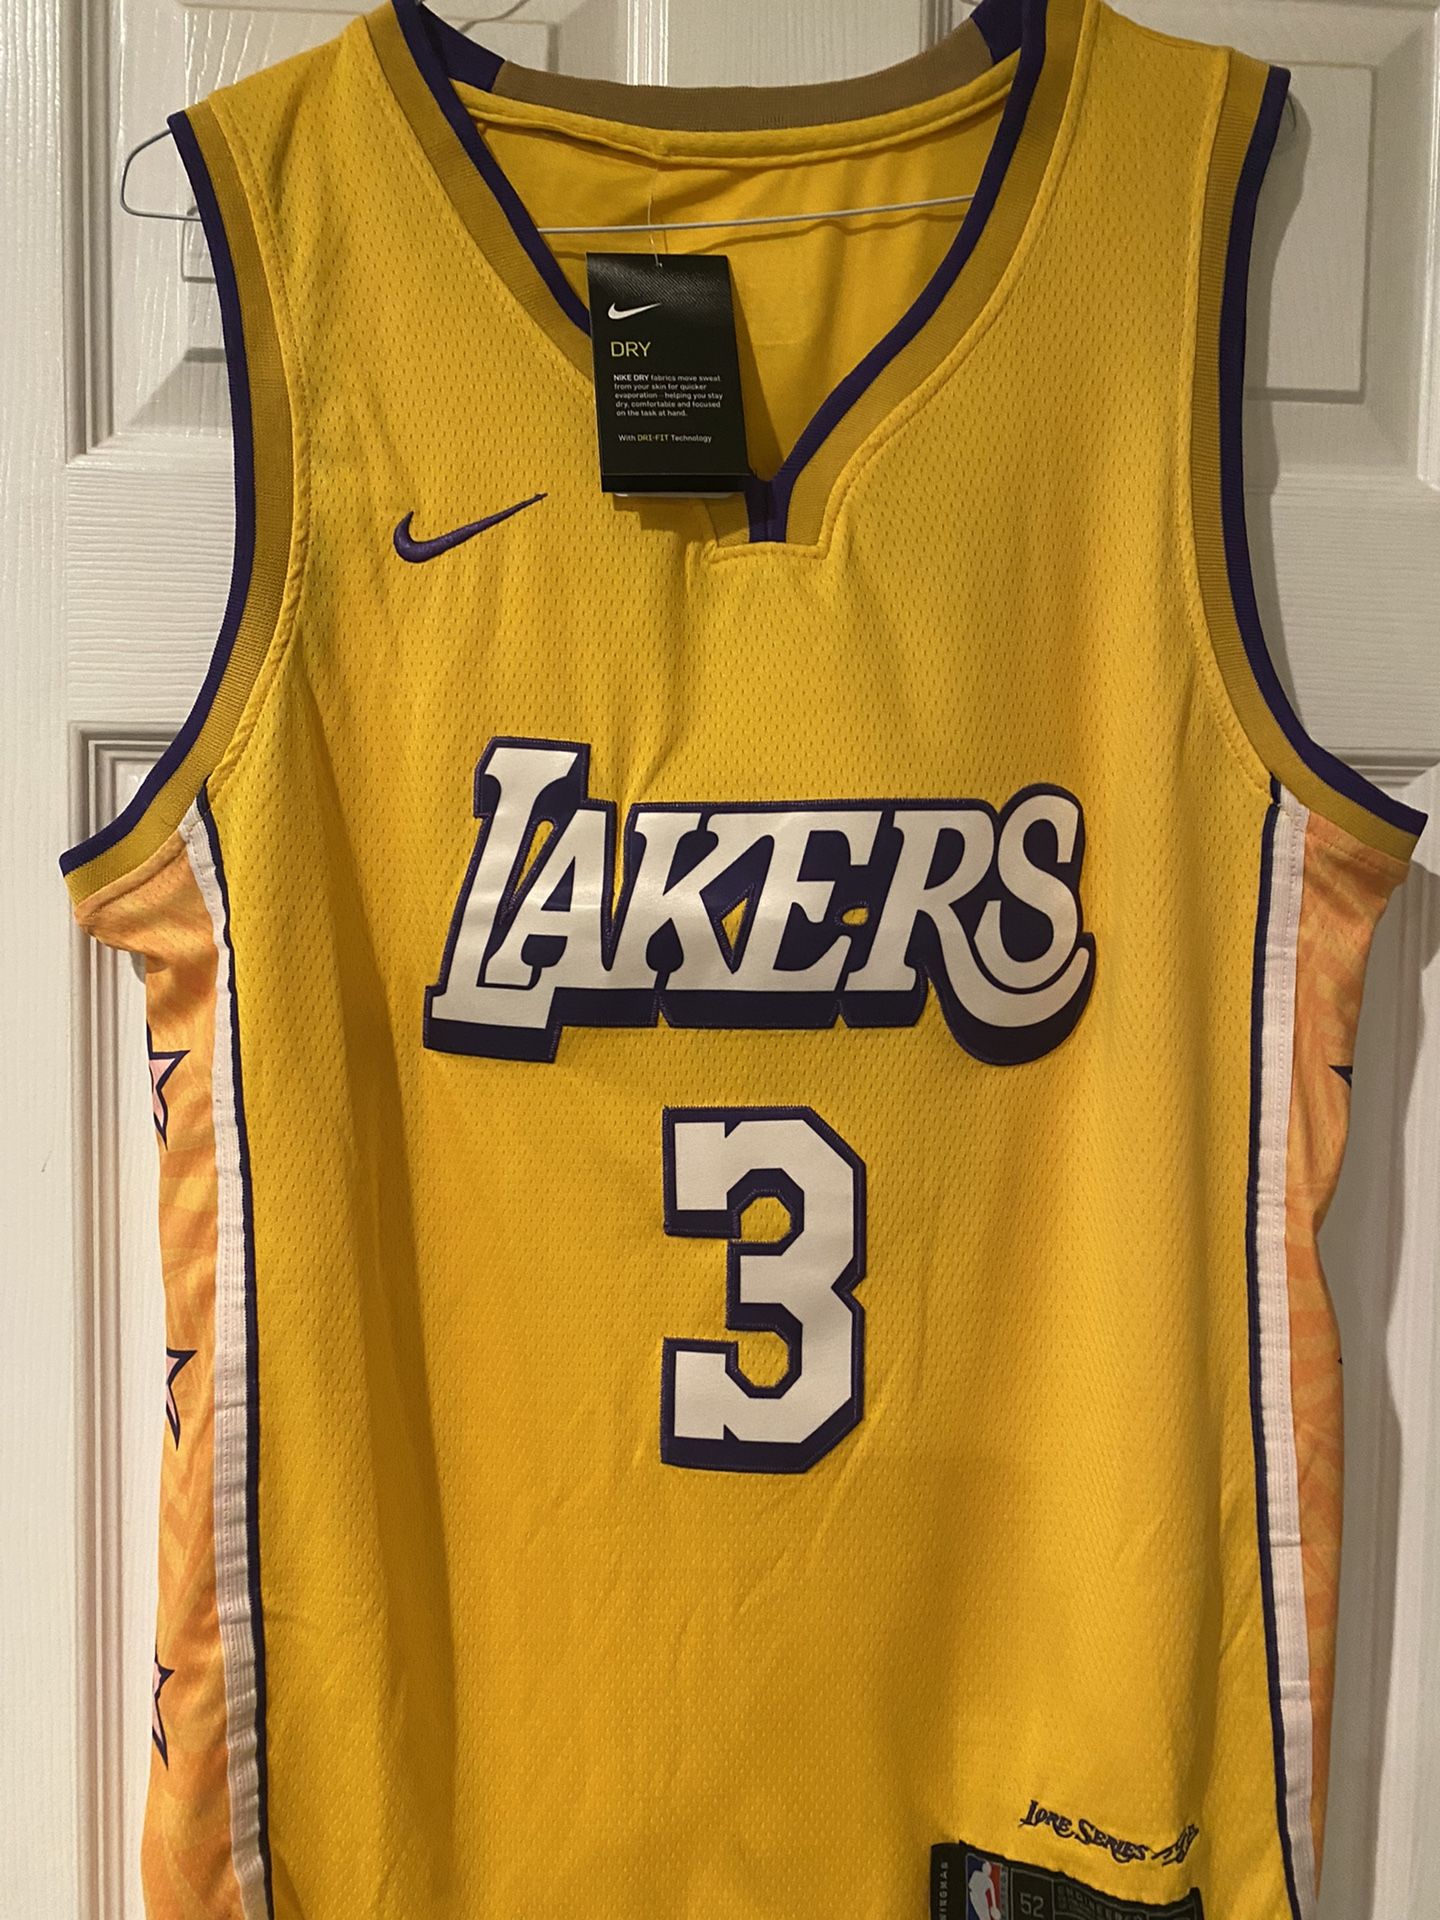 NBA LAKERS 12 BROWN Basketball Jersey Size 60 Adidas for Sale in Salinas,  CA - OfferUp